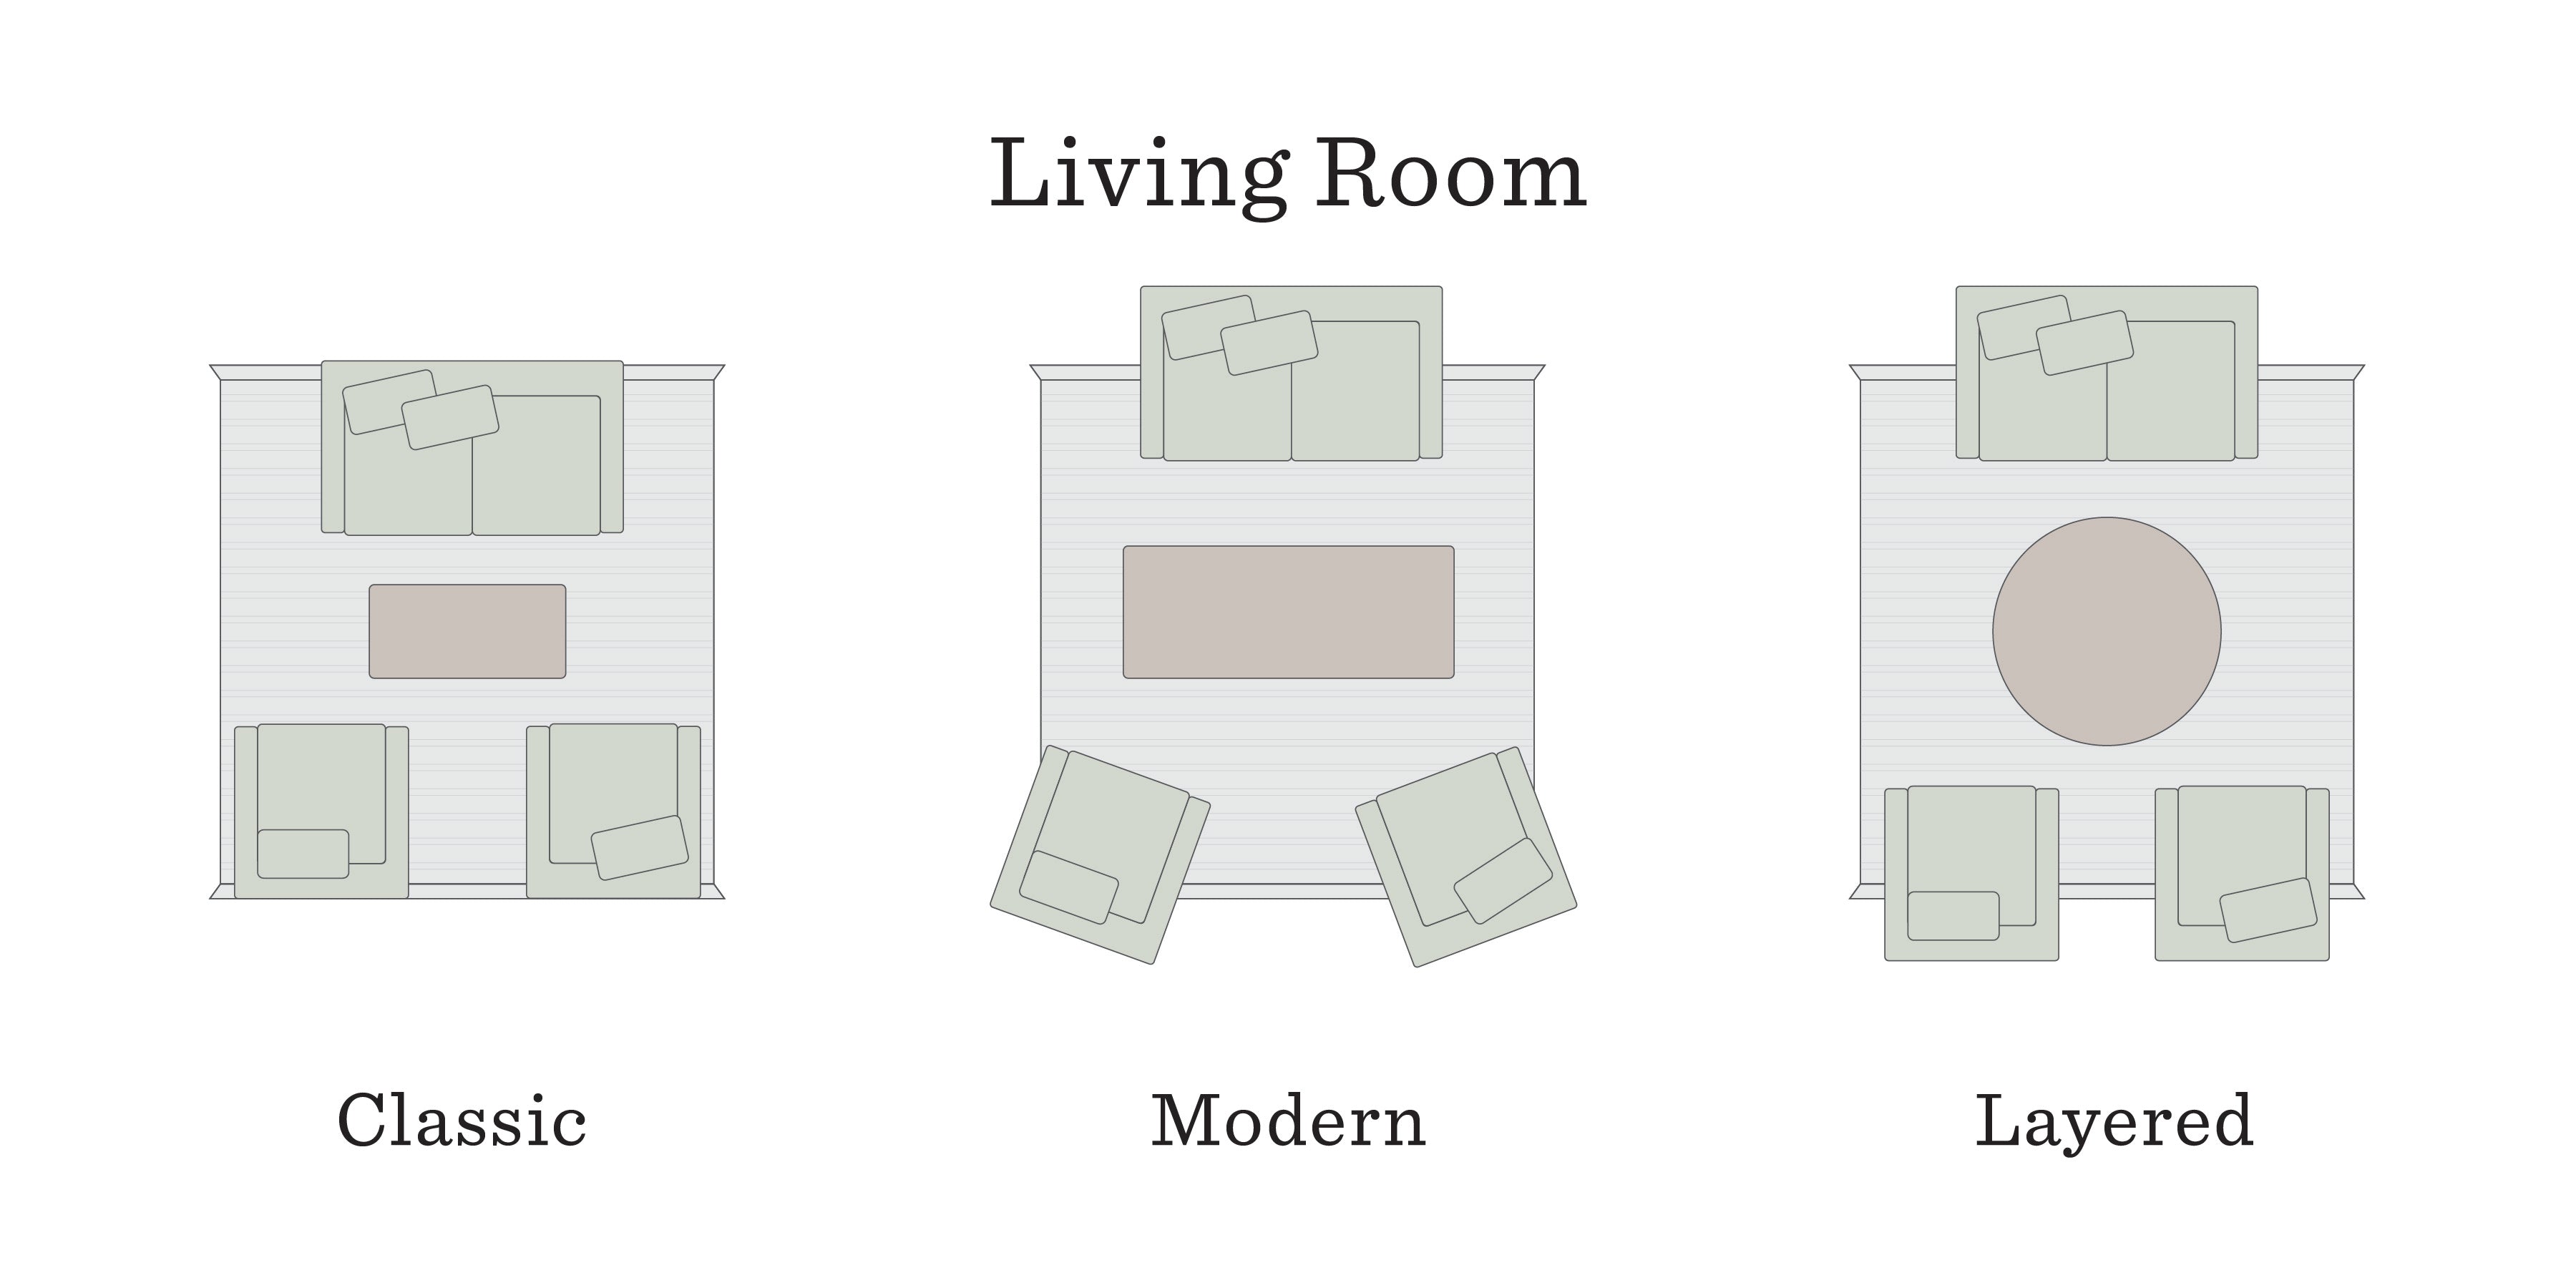 Rug layout options for living room